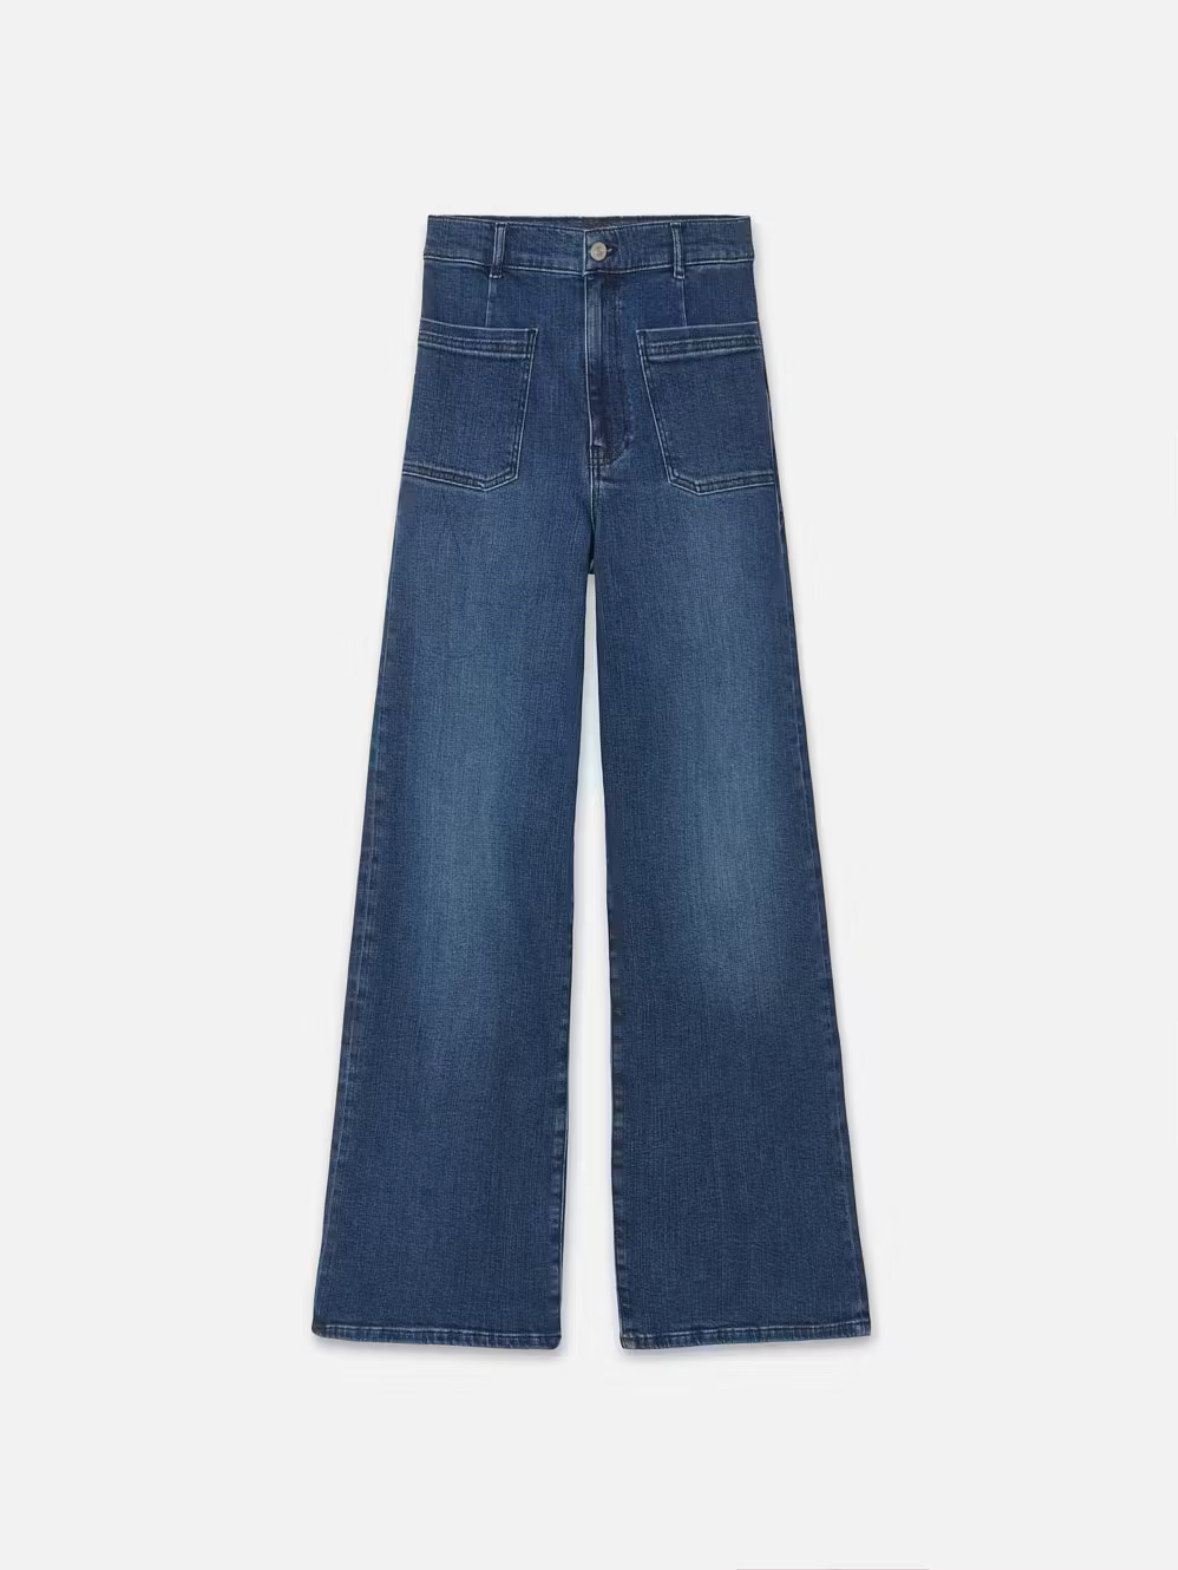 Wide leg jeans in a dark wash. Features front pockets.